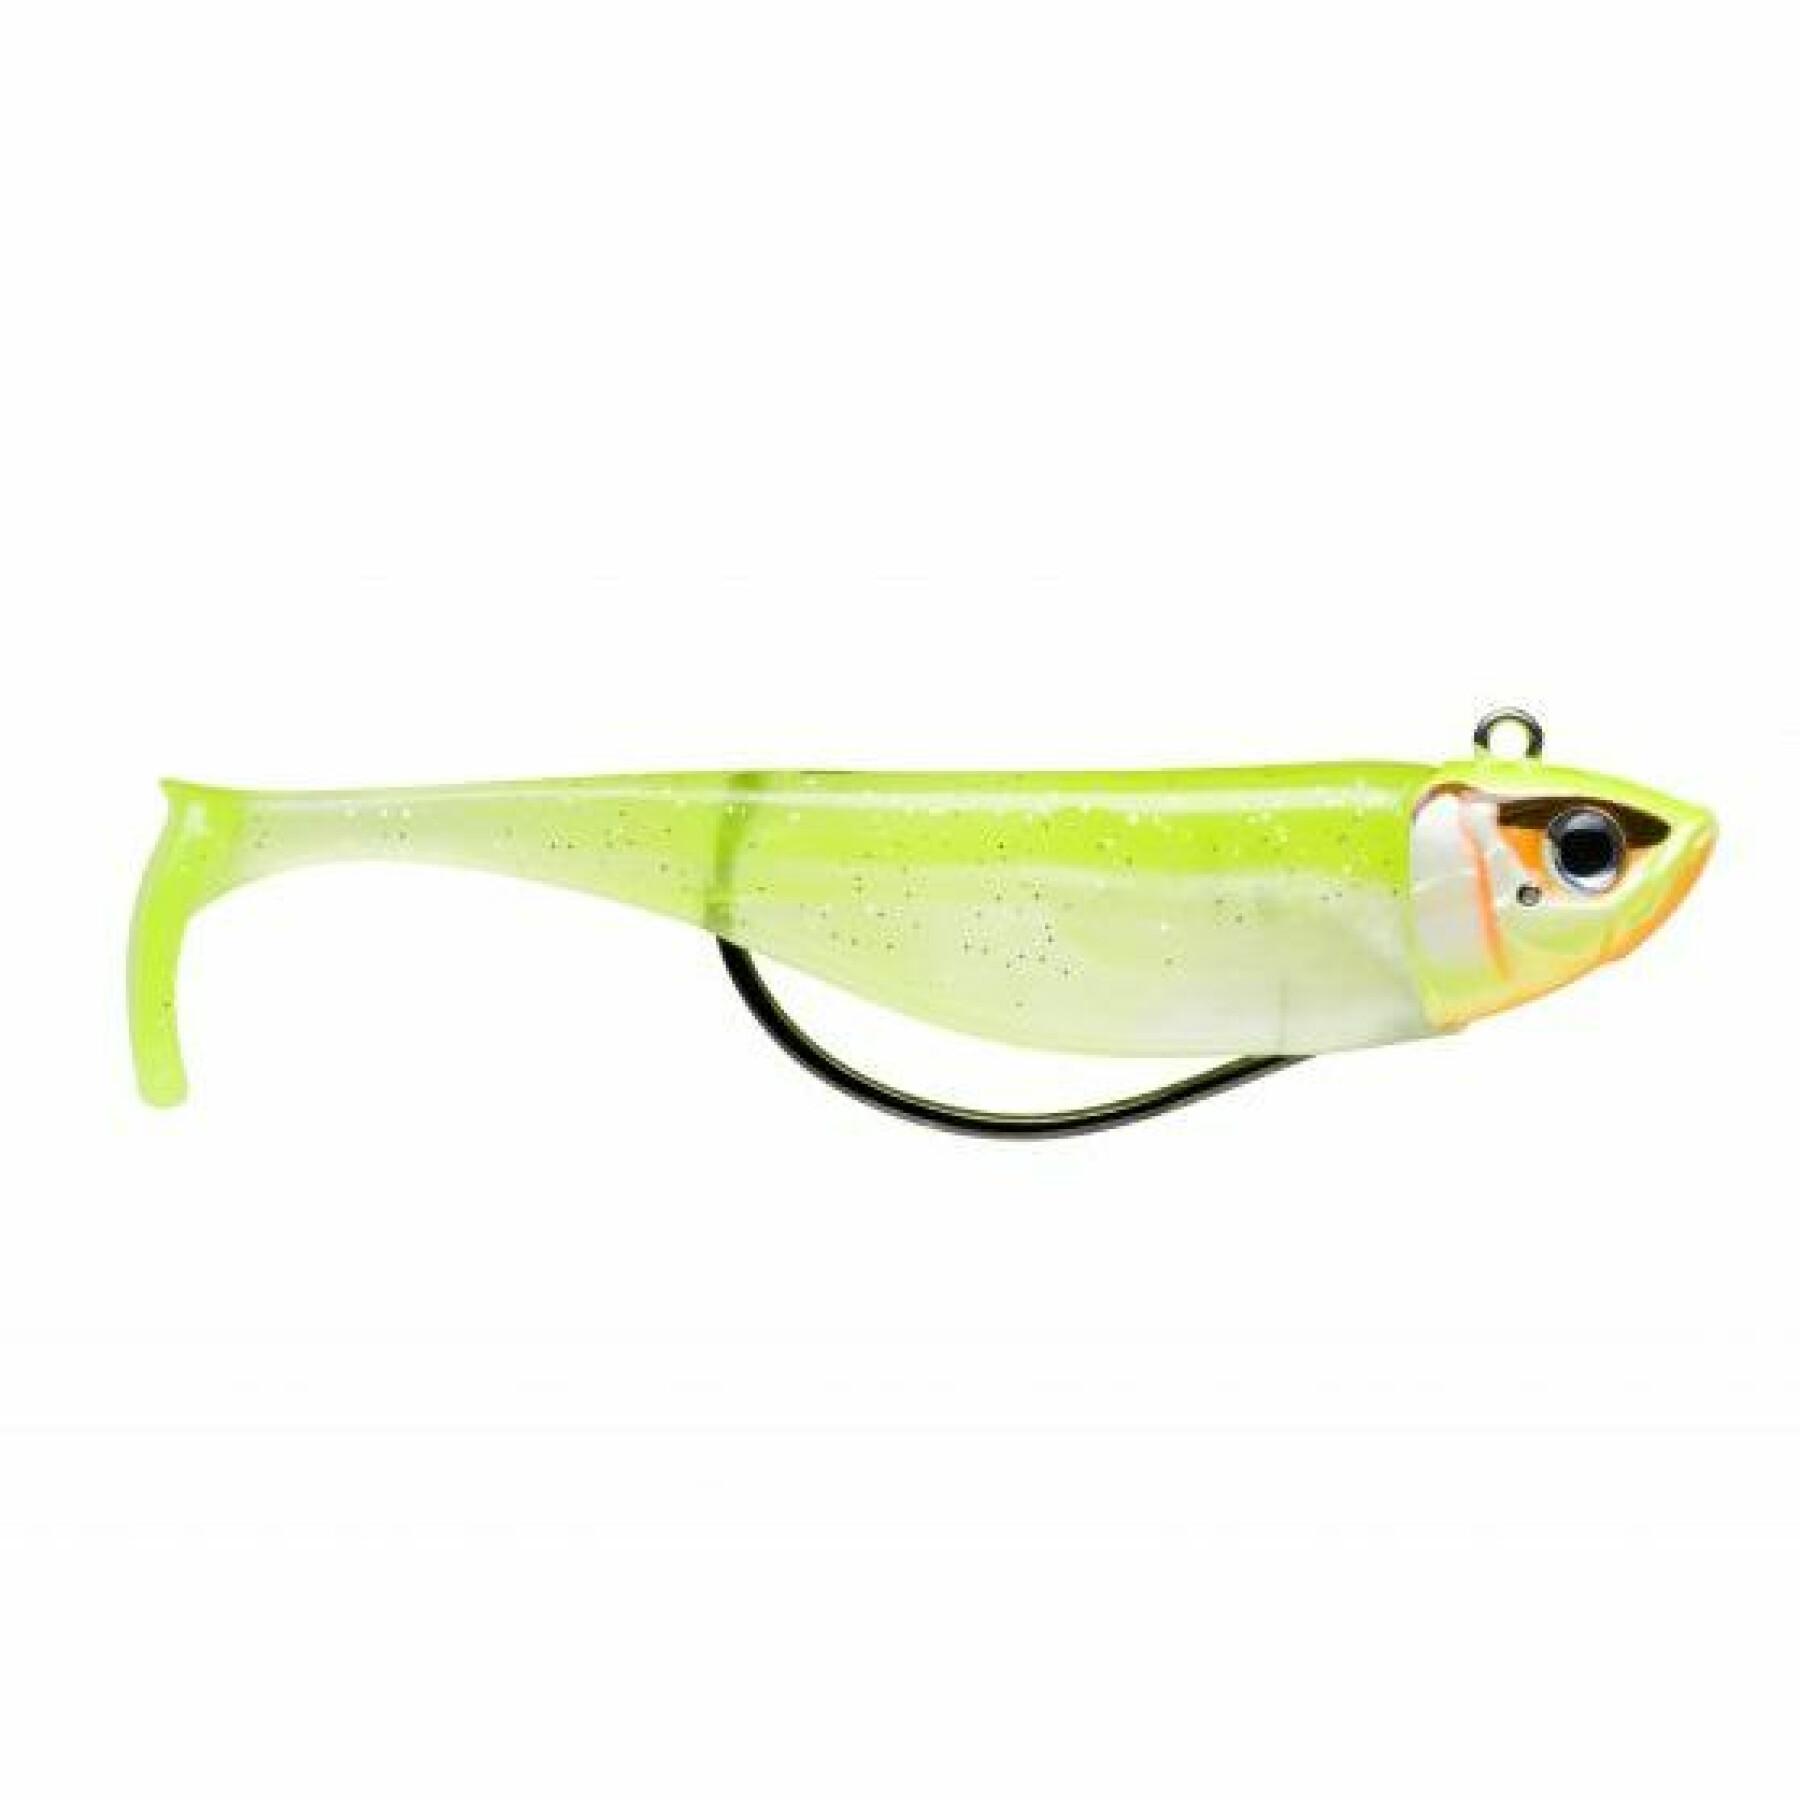 Soft lure Storm 360° gt coastal biscay shad